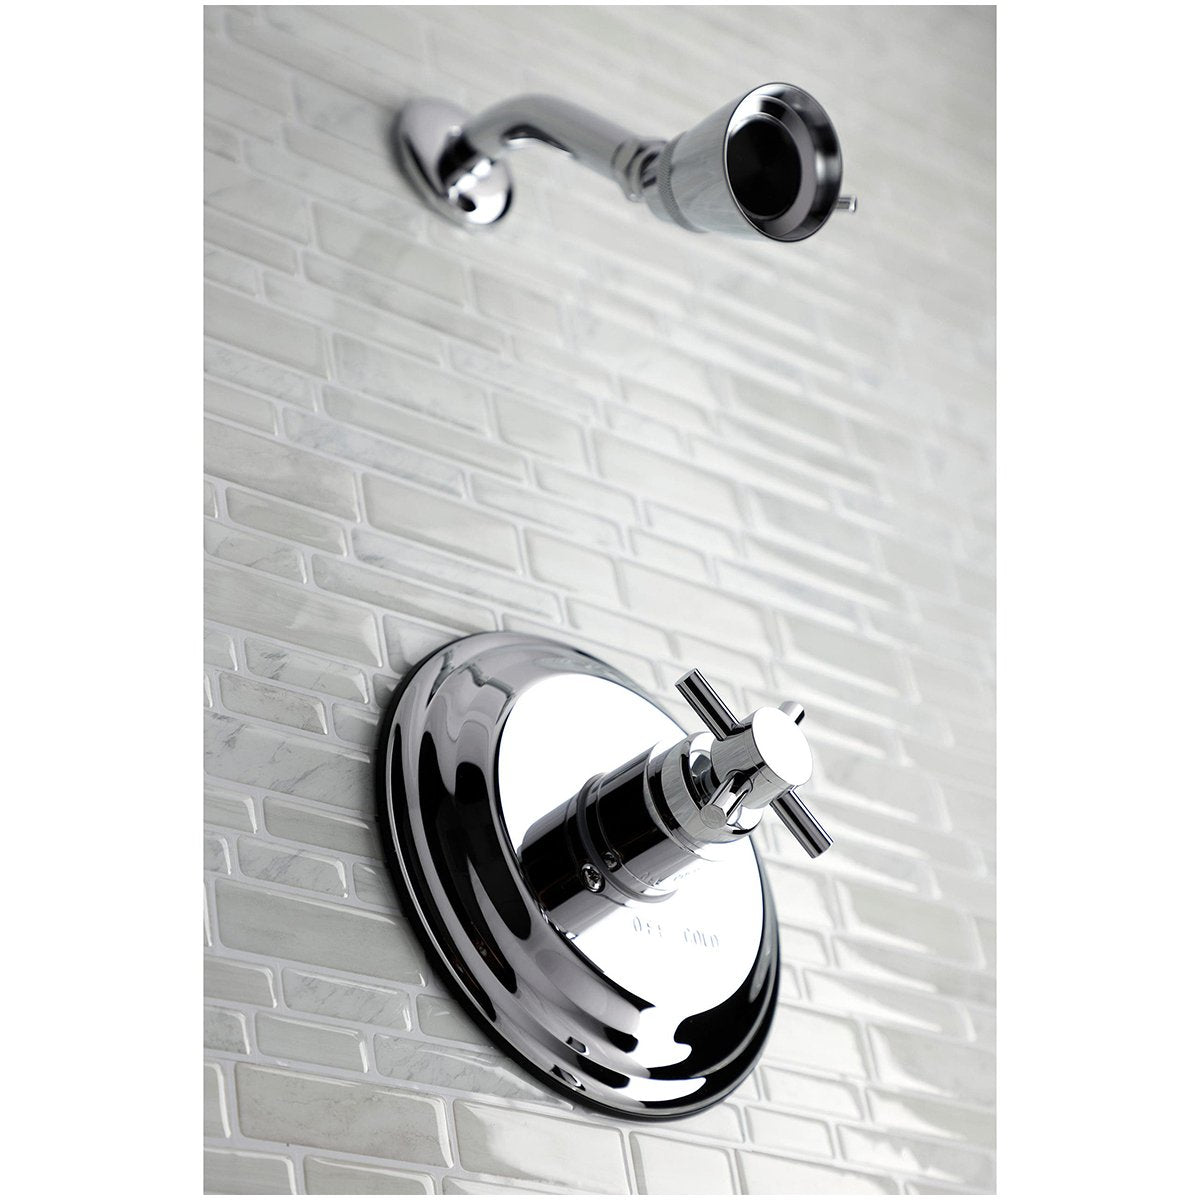 Kingston Brass KB2631DXTSO Shower Faucet Trim Only in Polished Chrome